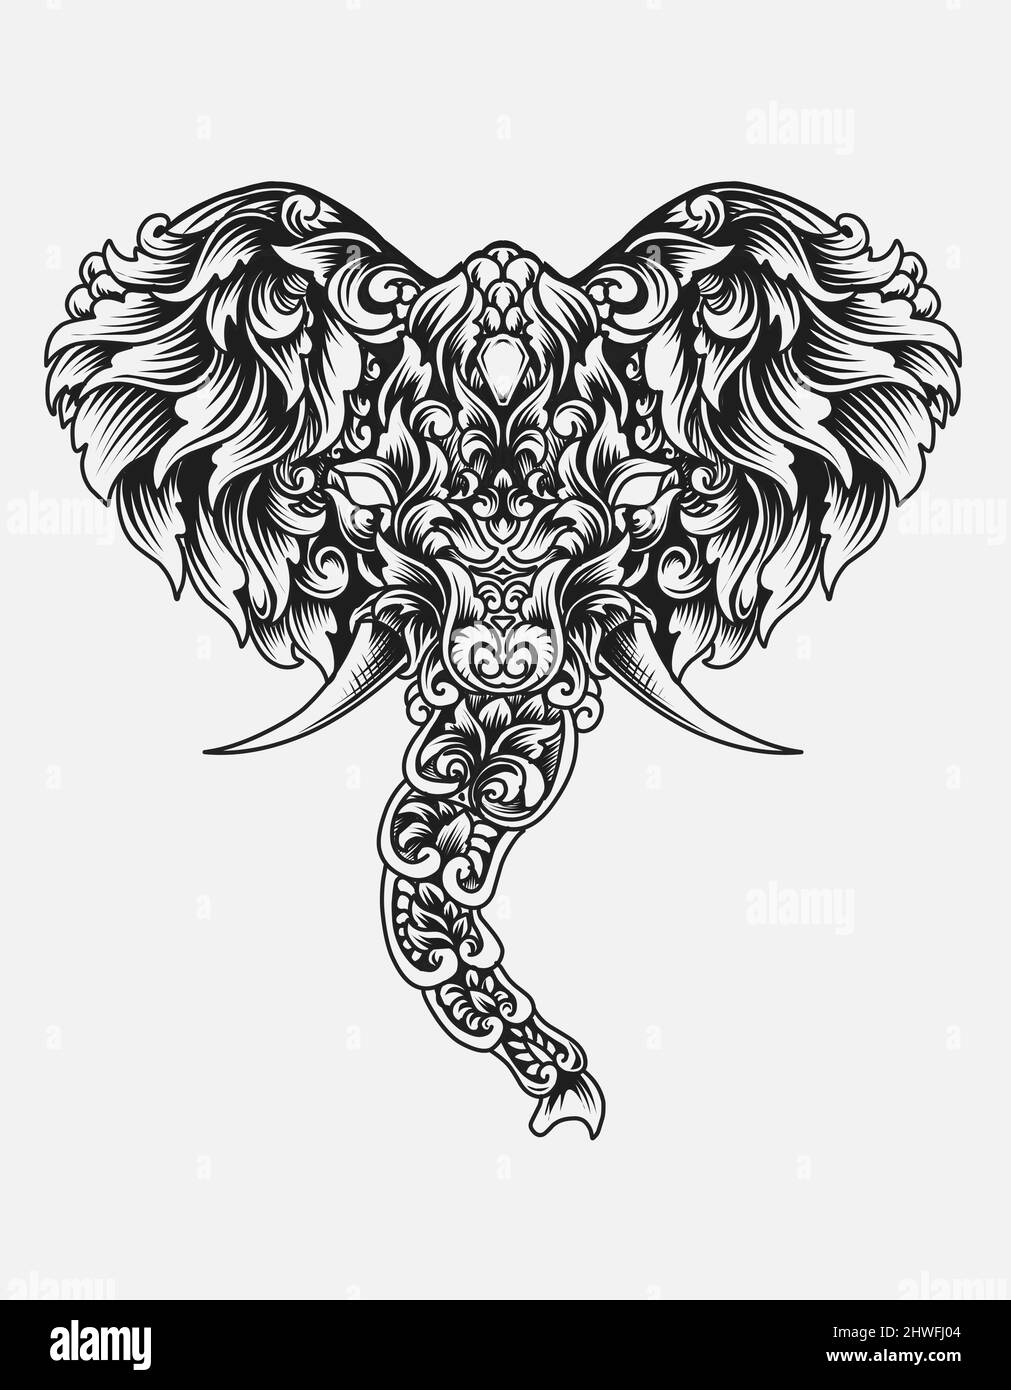 illustration vector elephant head with ornament style Stock Vector